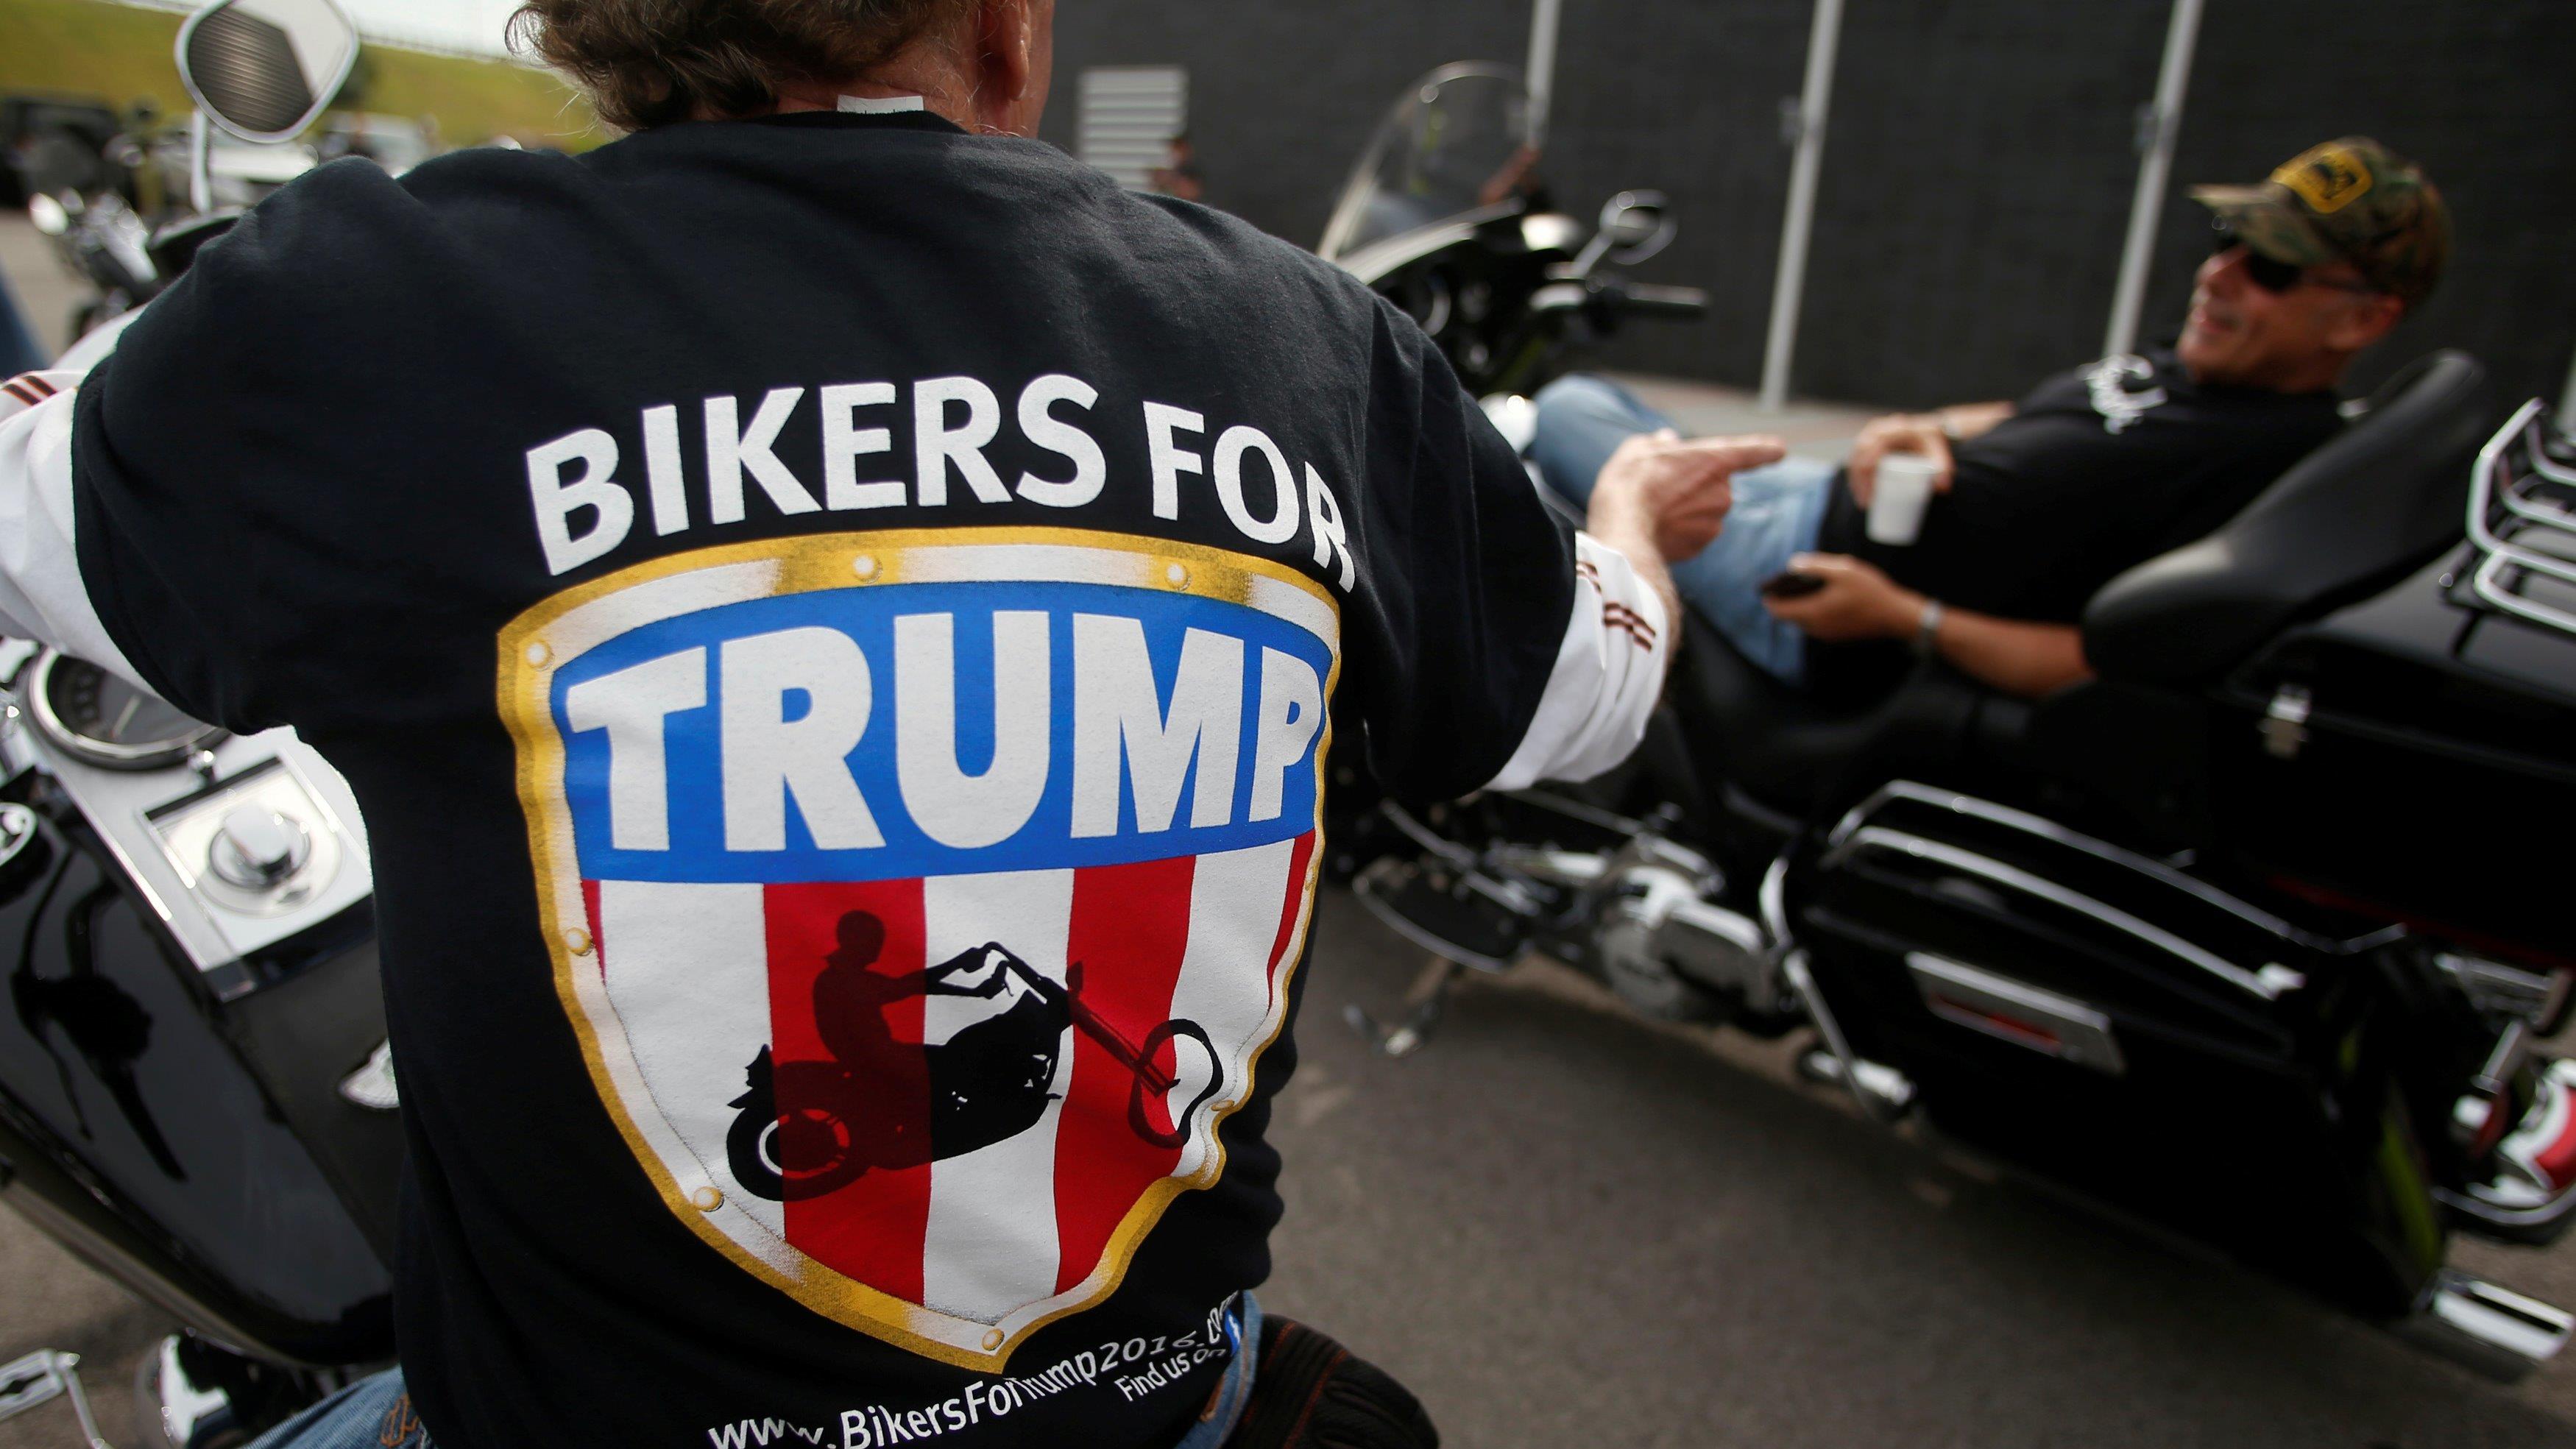 Chris Cox of Bikers for Trump on how the group will help if inauguration protests get out of hand. 